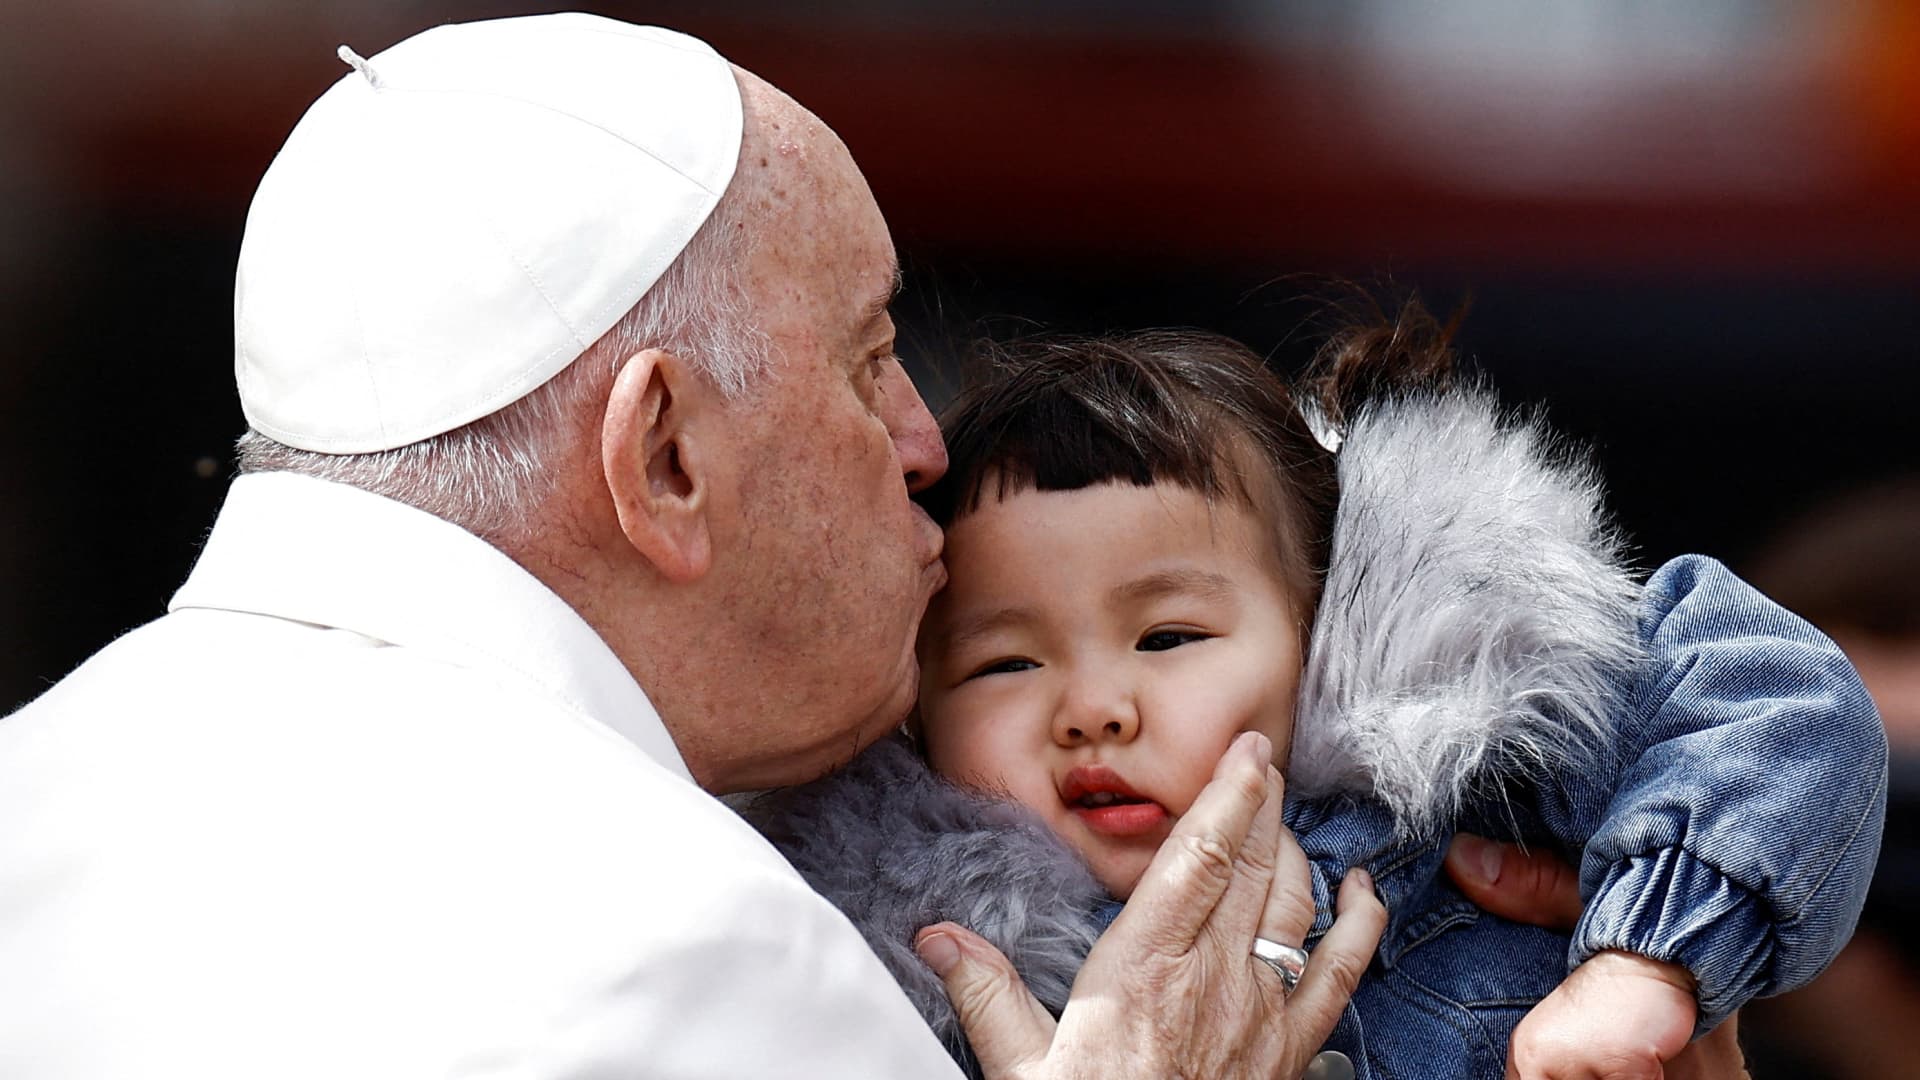 Pope Francis hospitalized for pulmonary infection, had difficulty breathing in recent days